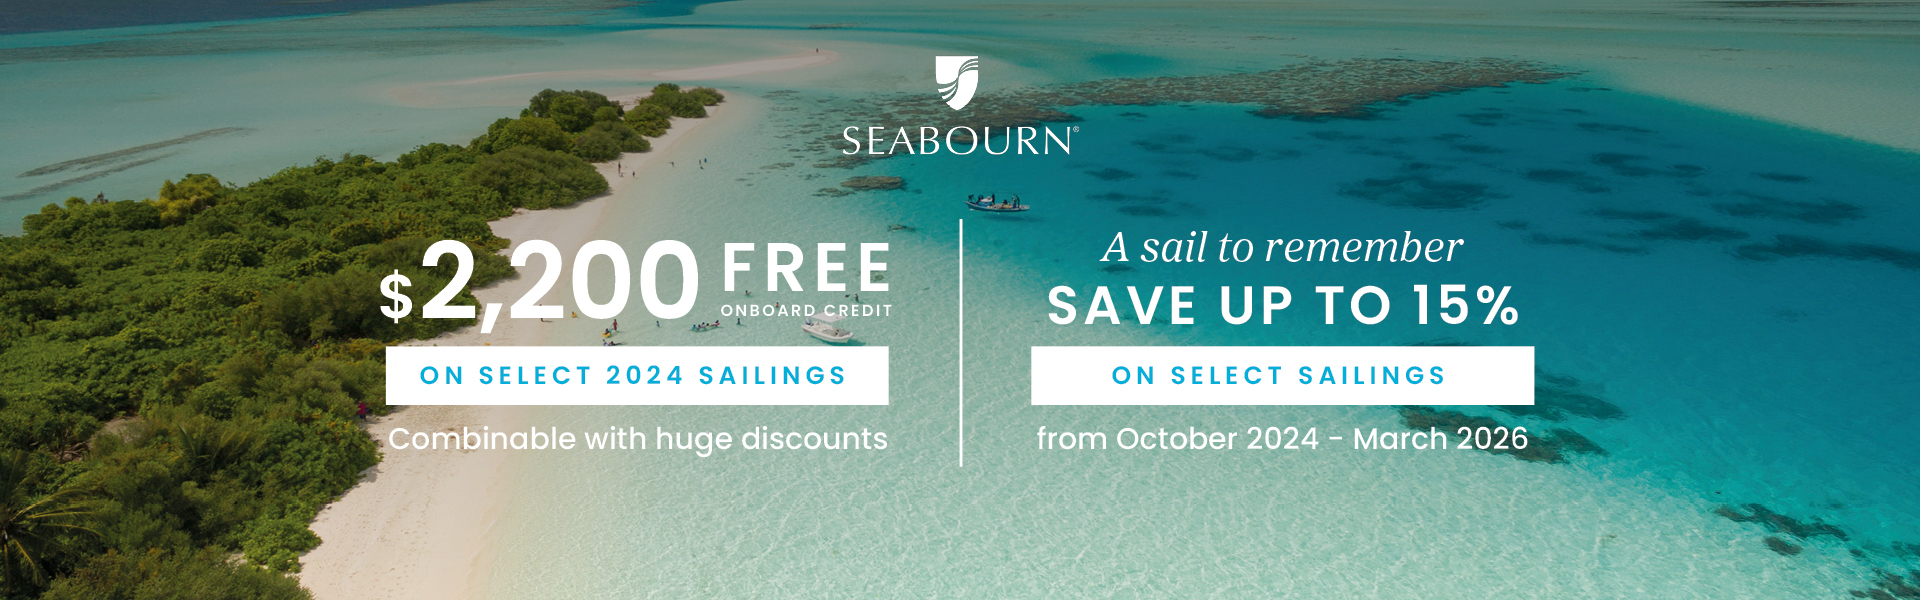 Seabourn Exclusive - Free Onboard Credit